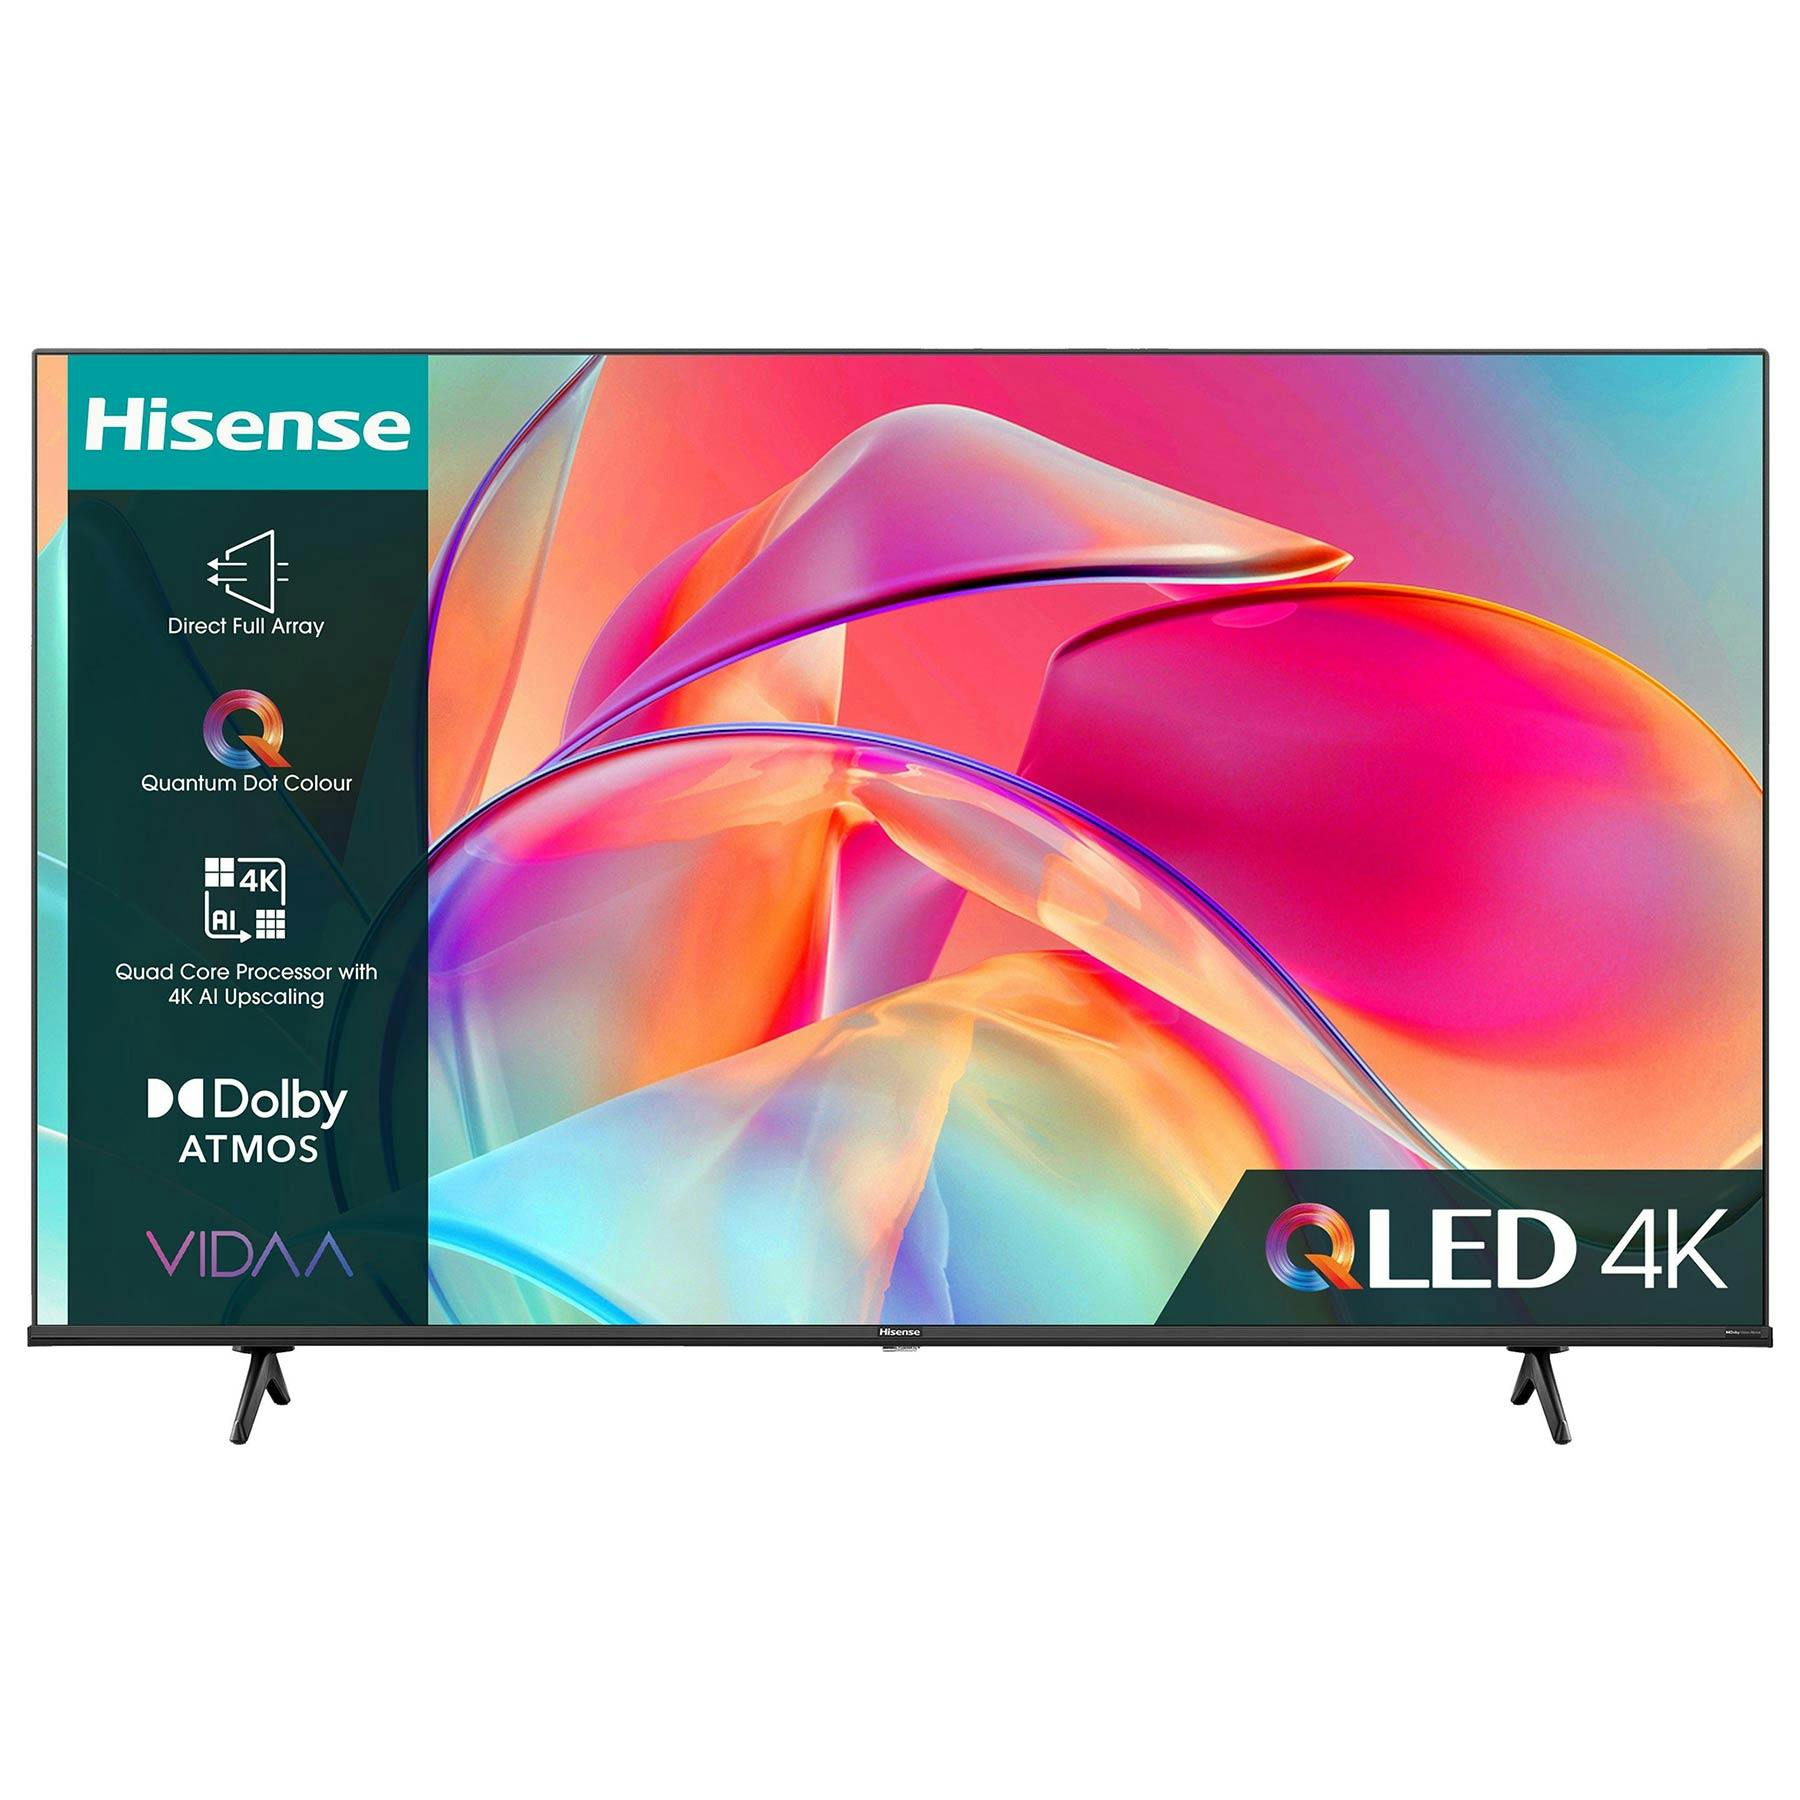 Hisense 50A6KTUK review: 4K HDR TV with a fully featured smart system